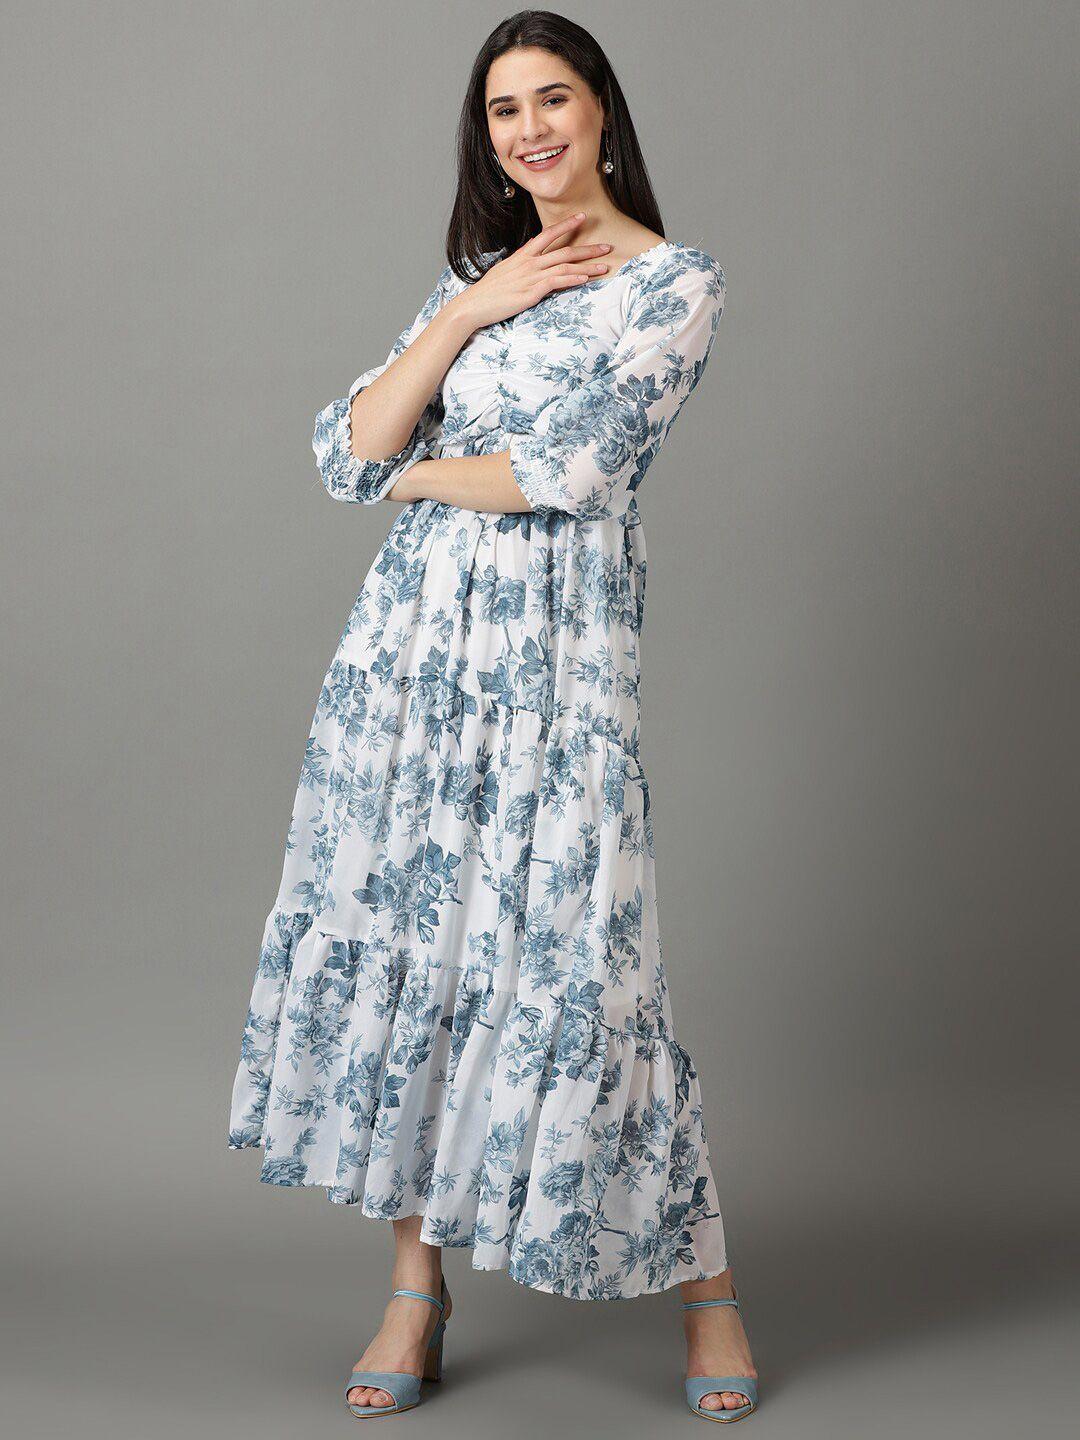 showoff-floral-printed-smocked-ruched-and-tiered-chiffon-fit-&-flare-midi-dress